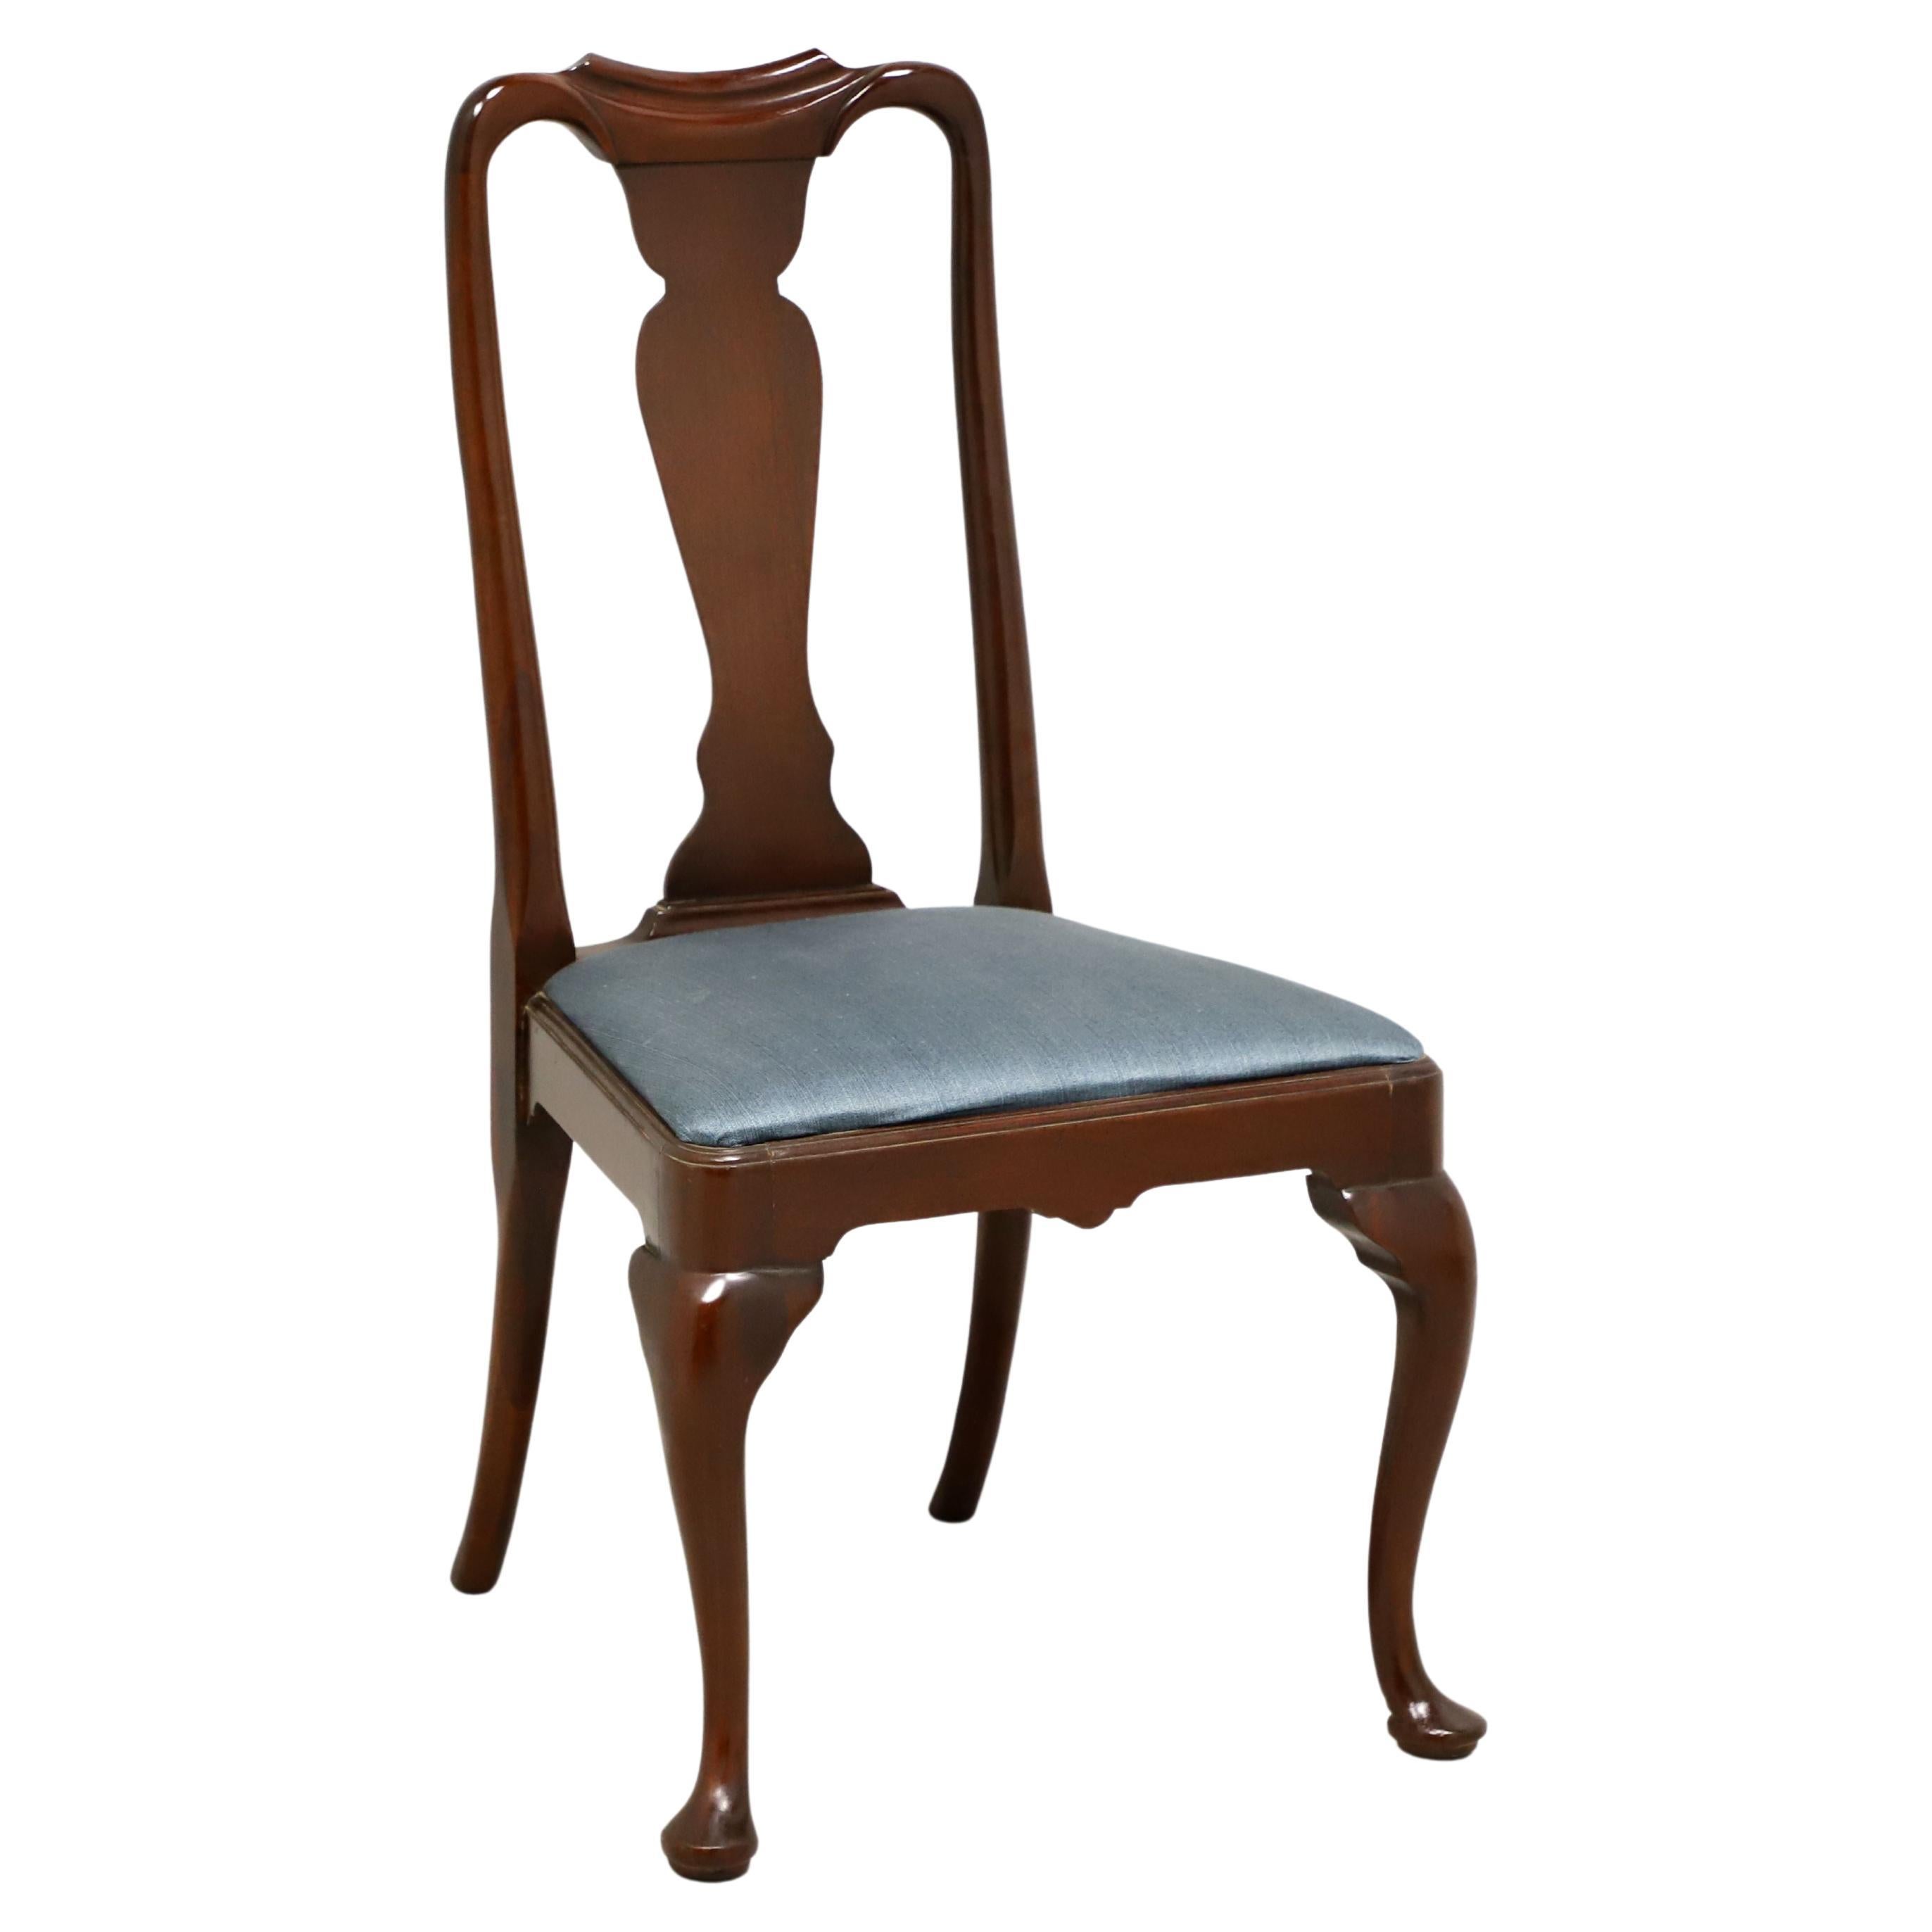 HICKORY CHAIR Solid Mahogany Queen Anne Style Dining Side Chair